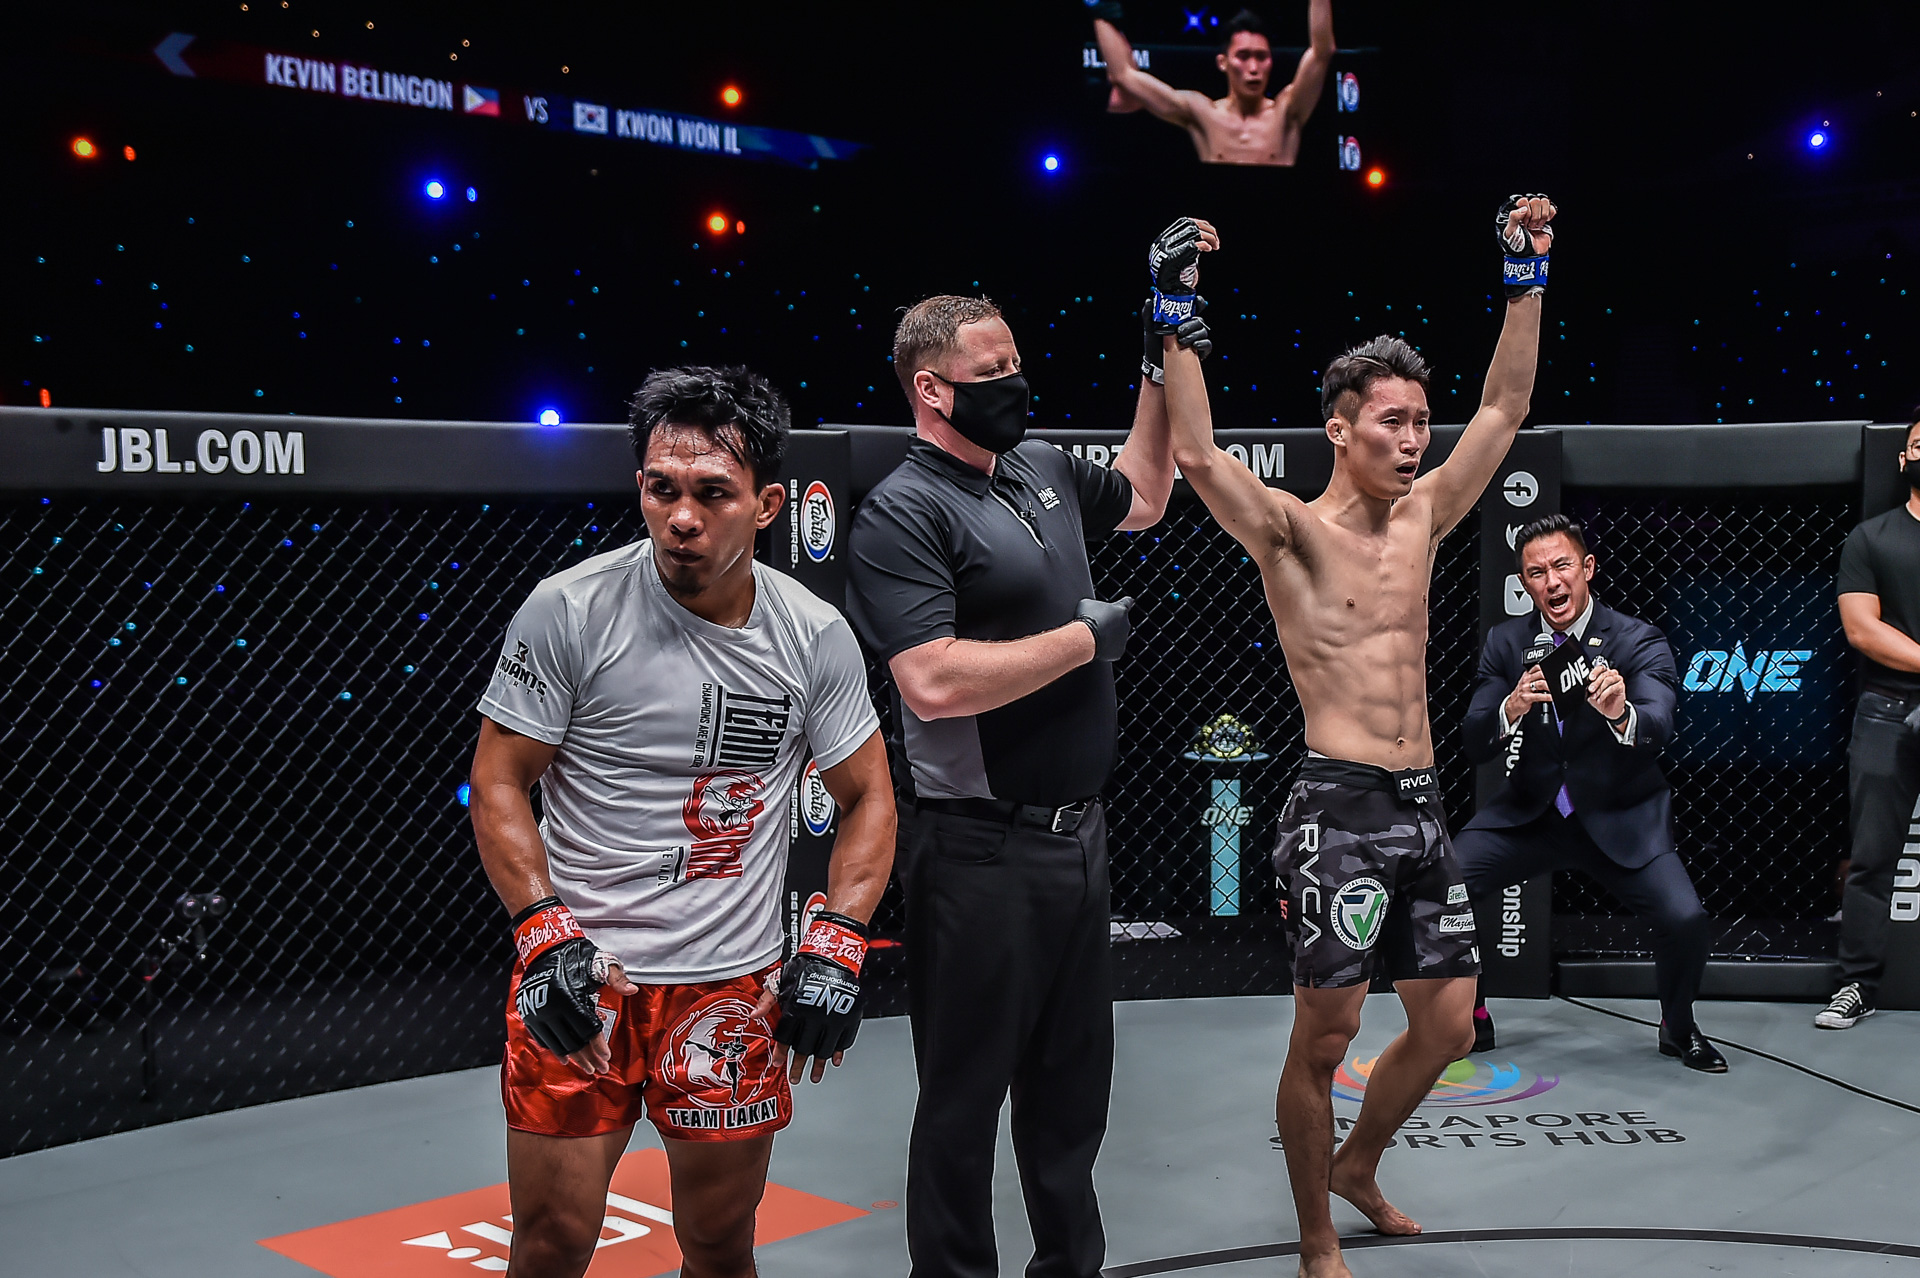 ONE-Winter-Warrior-Kwon-Won-Il-def-Kevin-Belingon-2 Kevin Belingon dead set on clinching first win in four years Mixed Martial Arts News ONE Championship  - philippine sports news